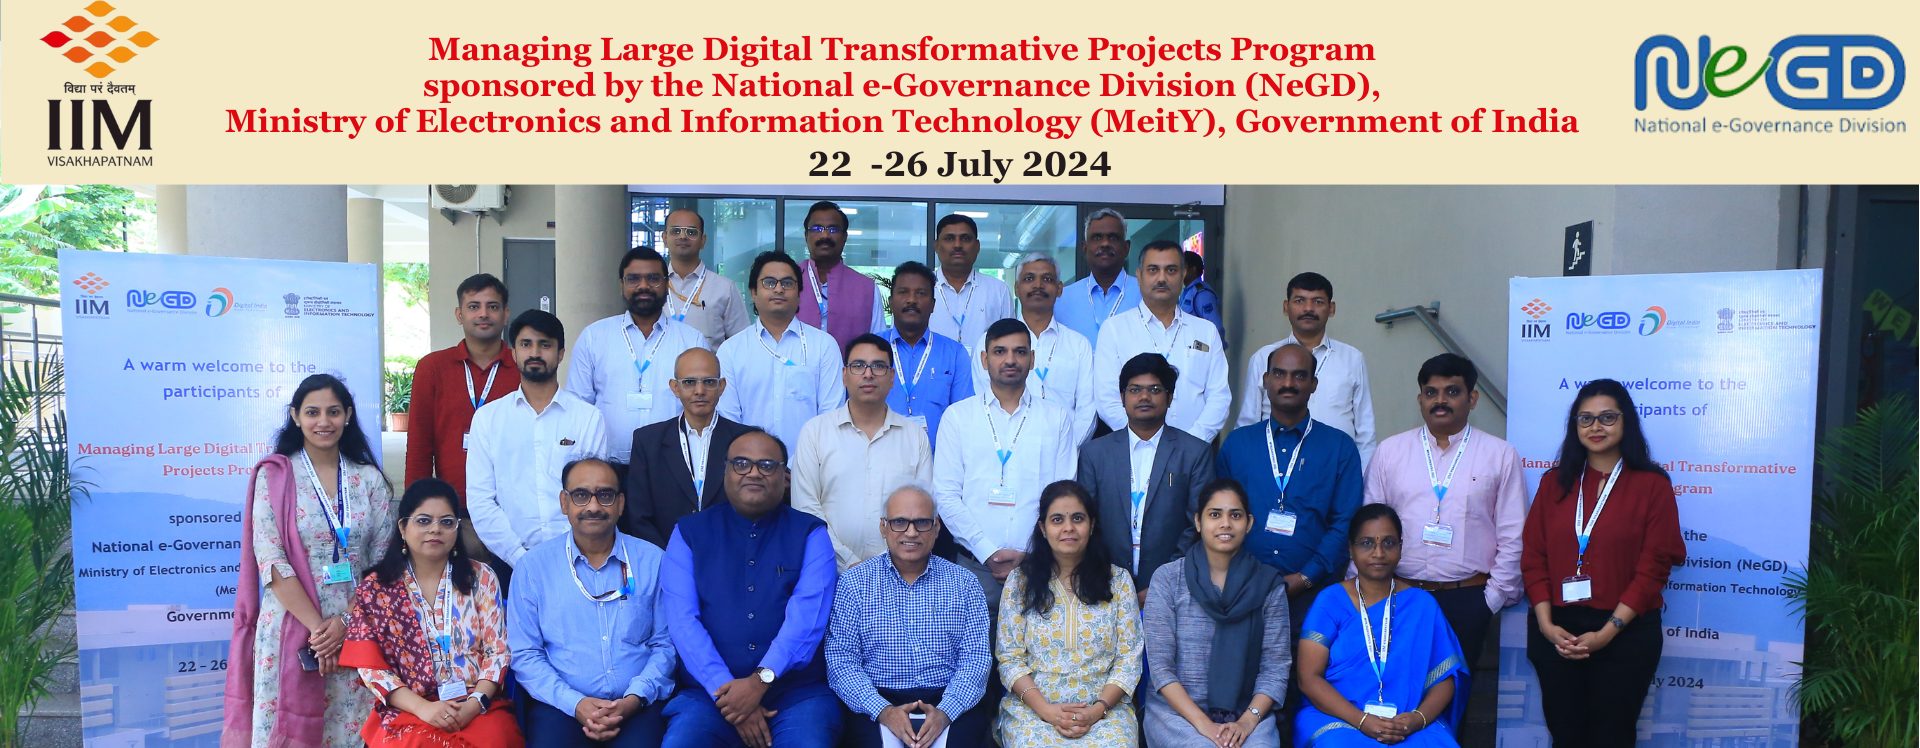 NeGD supported program on Managing Large Digital Transformative Projects